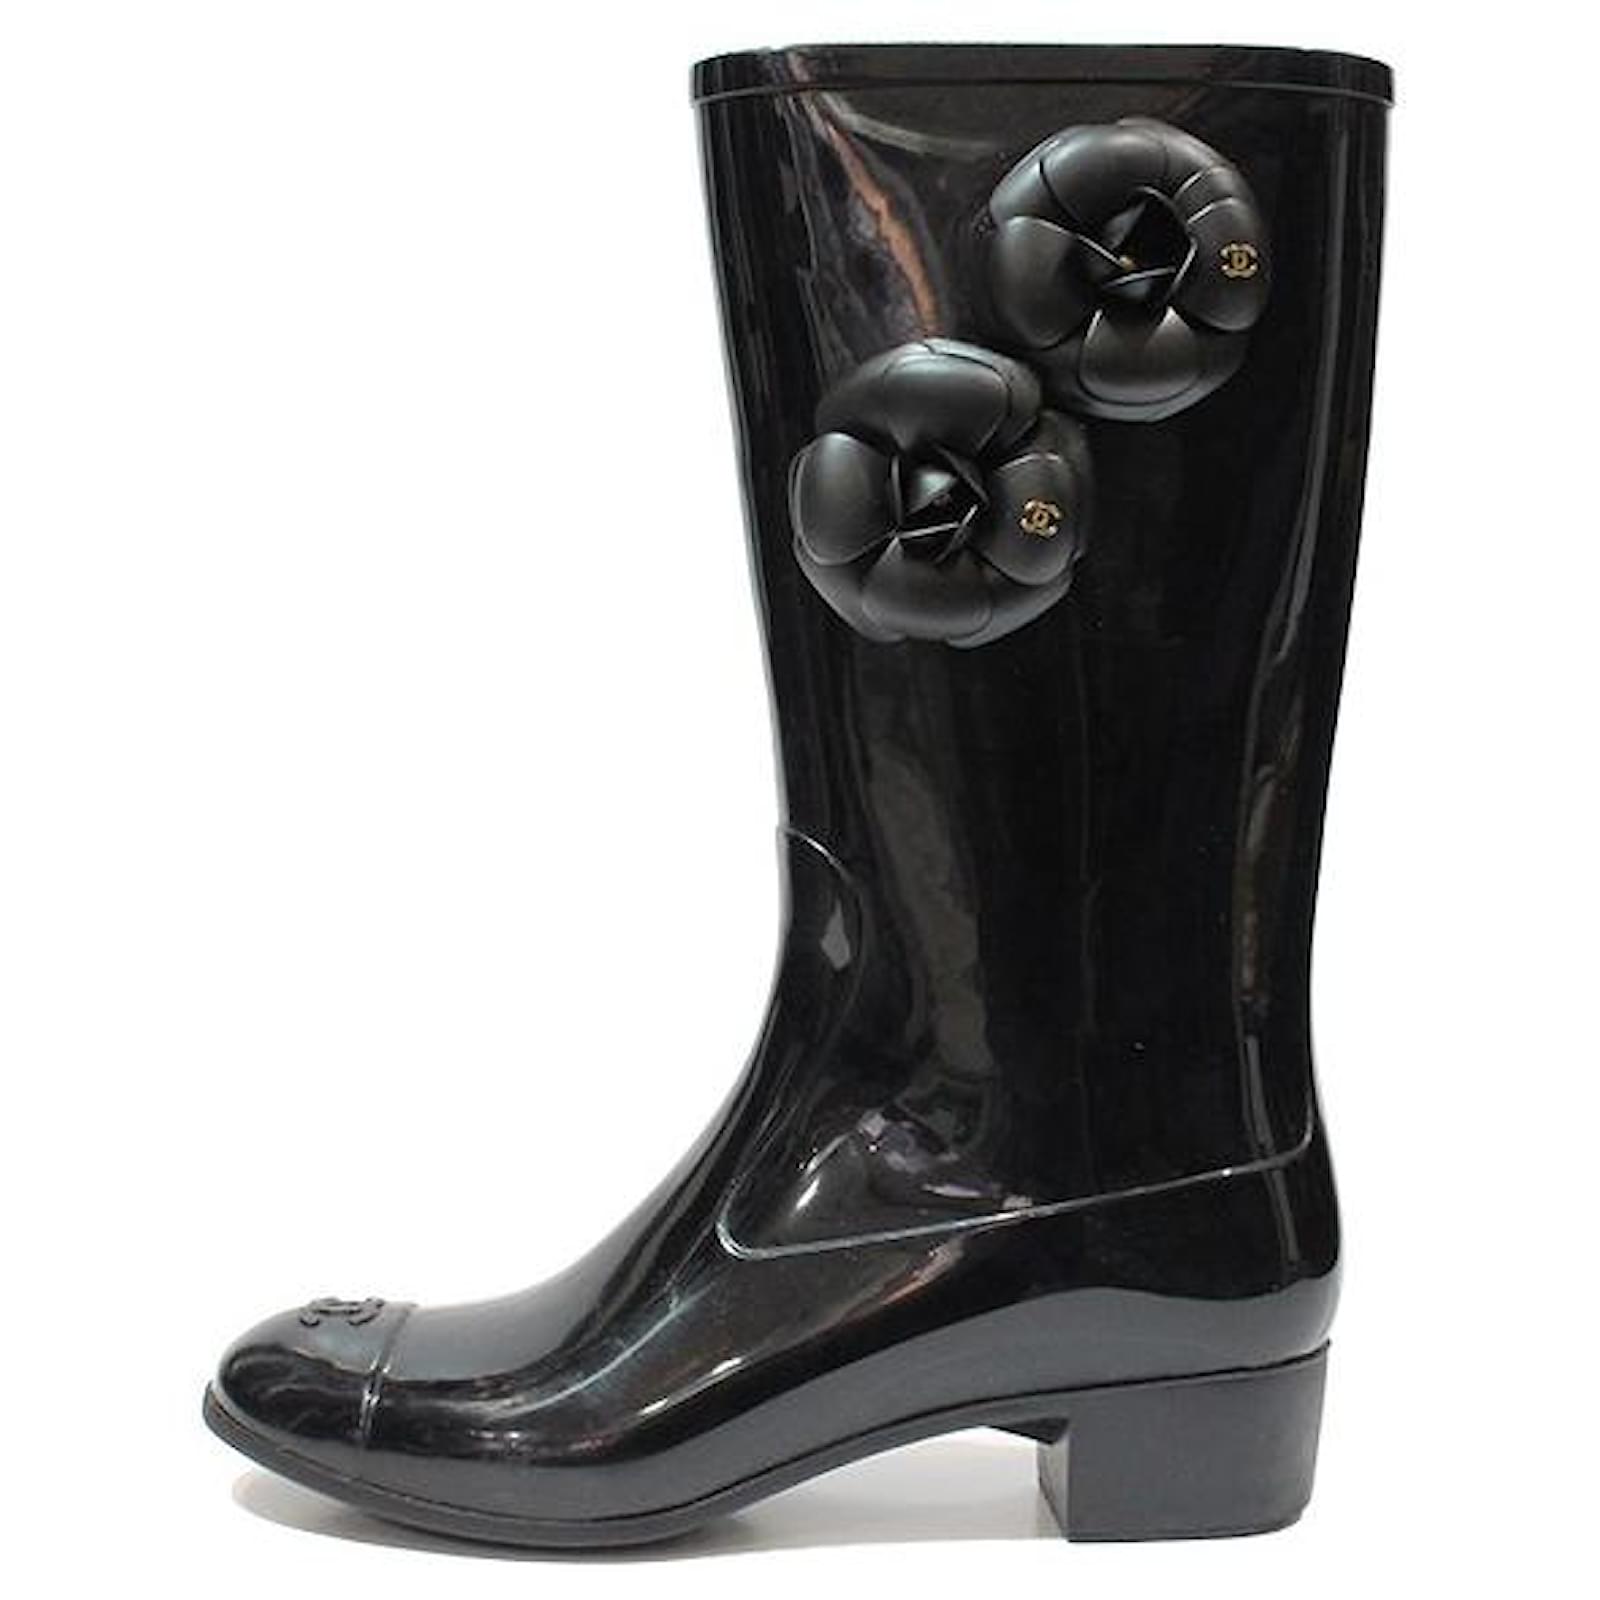 Boots Chanel Black size 39 EU in Rubber - 19688598